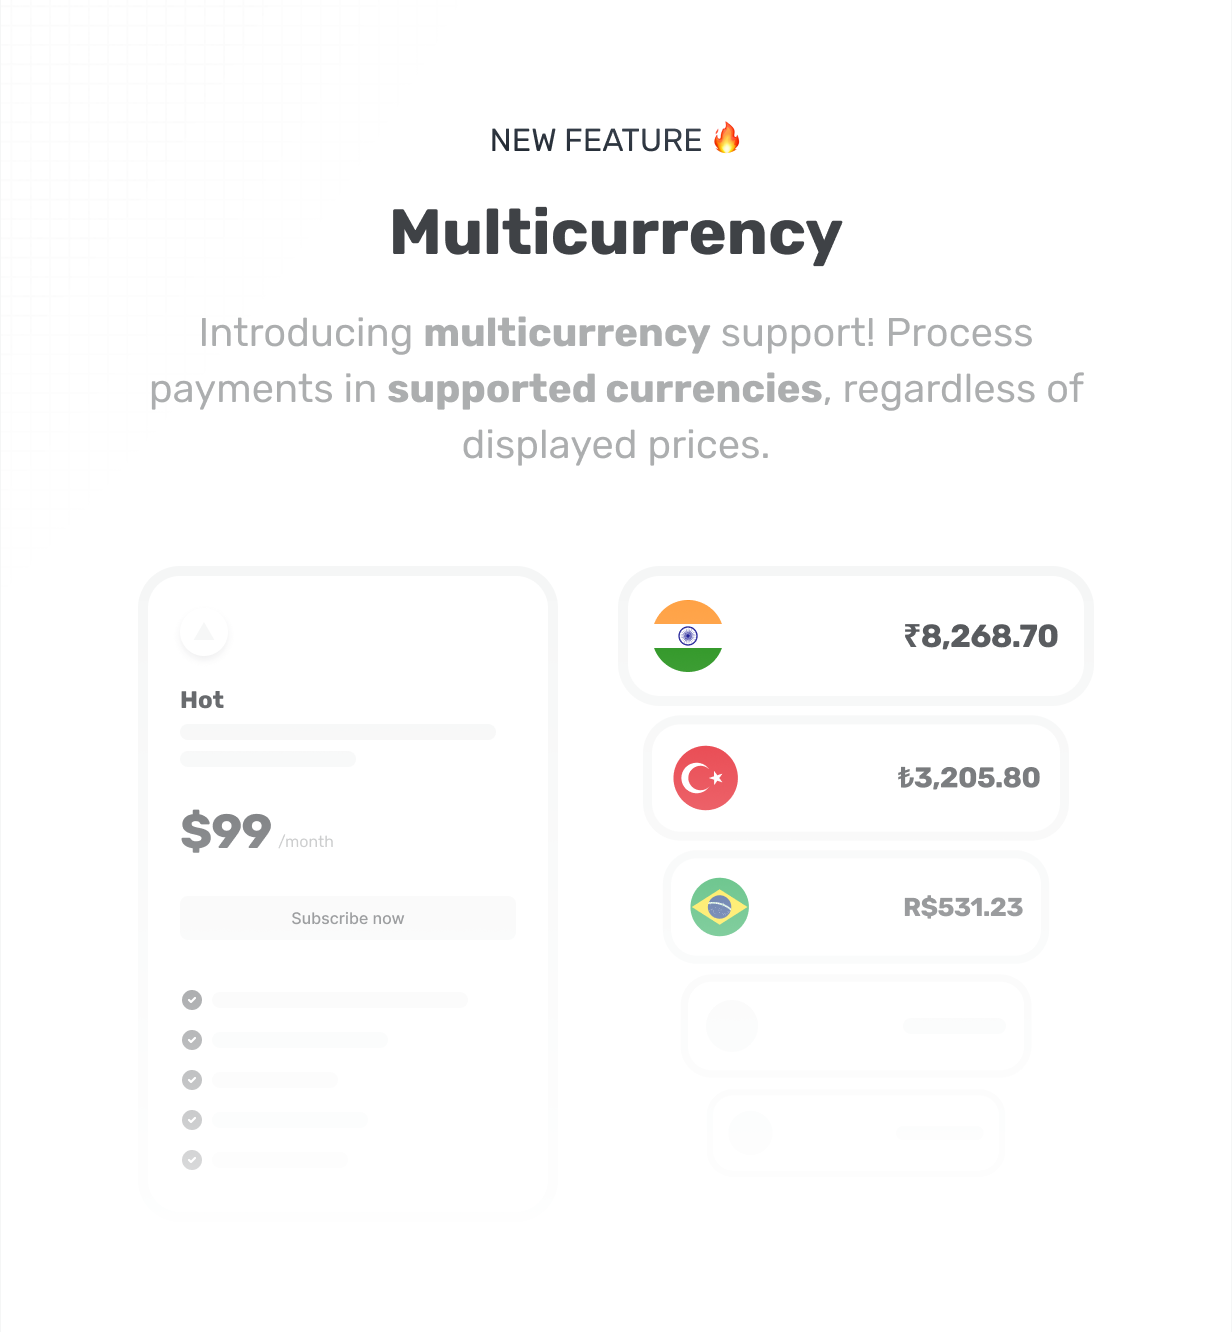 Introducing multicurrency support! Process payments in supported currencies, regardless of displayed prices. @heyaikeedo [HASH=13823]#aikeedo[/HASH]